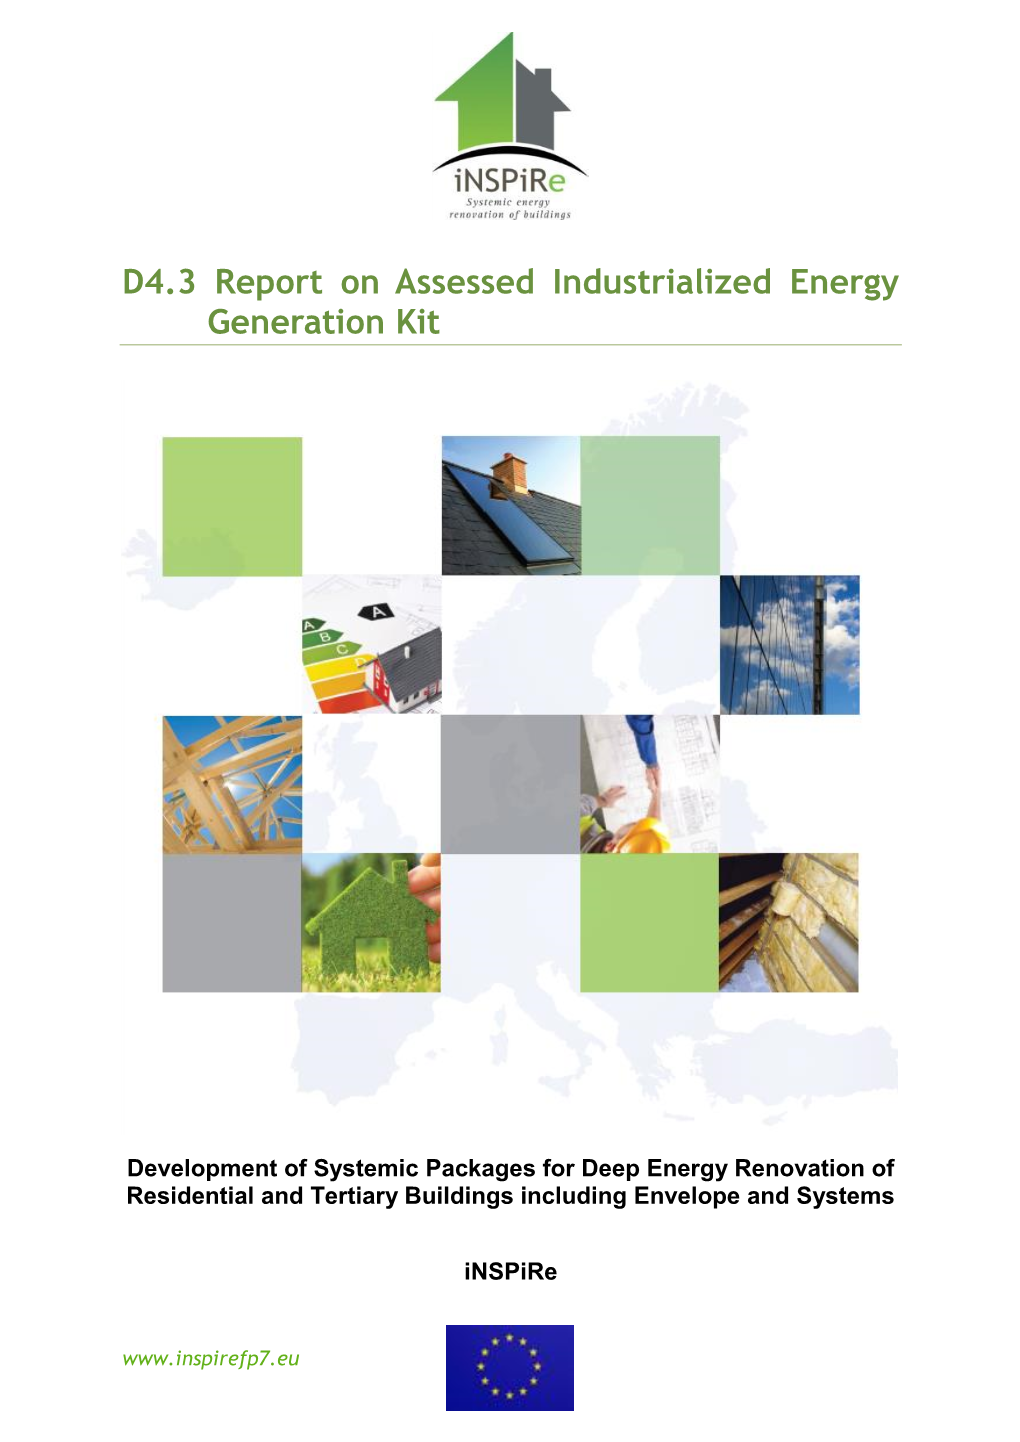 D4.3 Report on Assessed Industrialized Energy Generation Kit